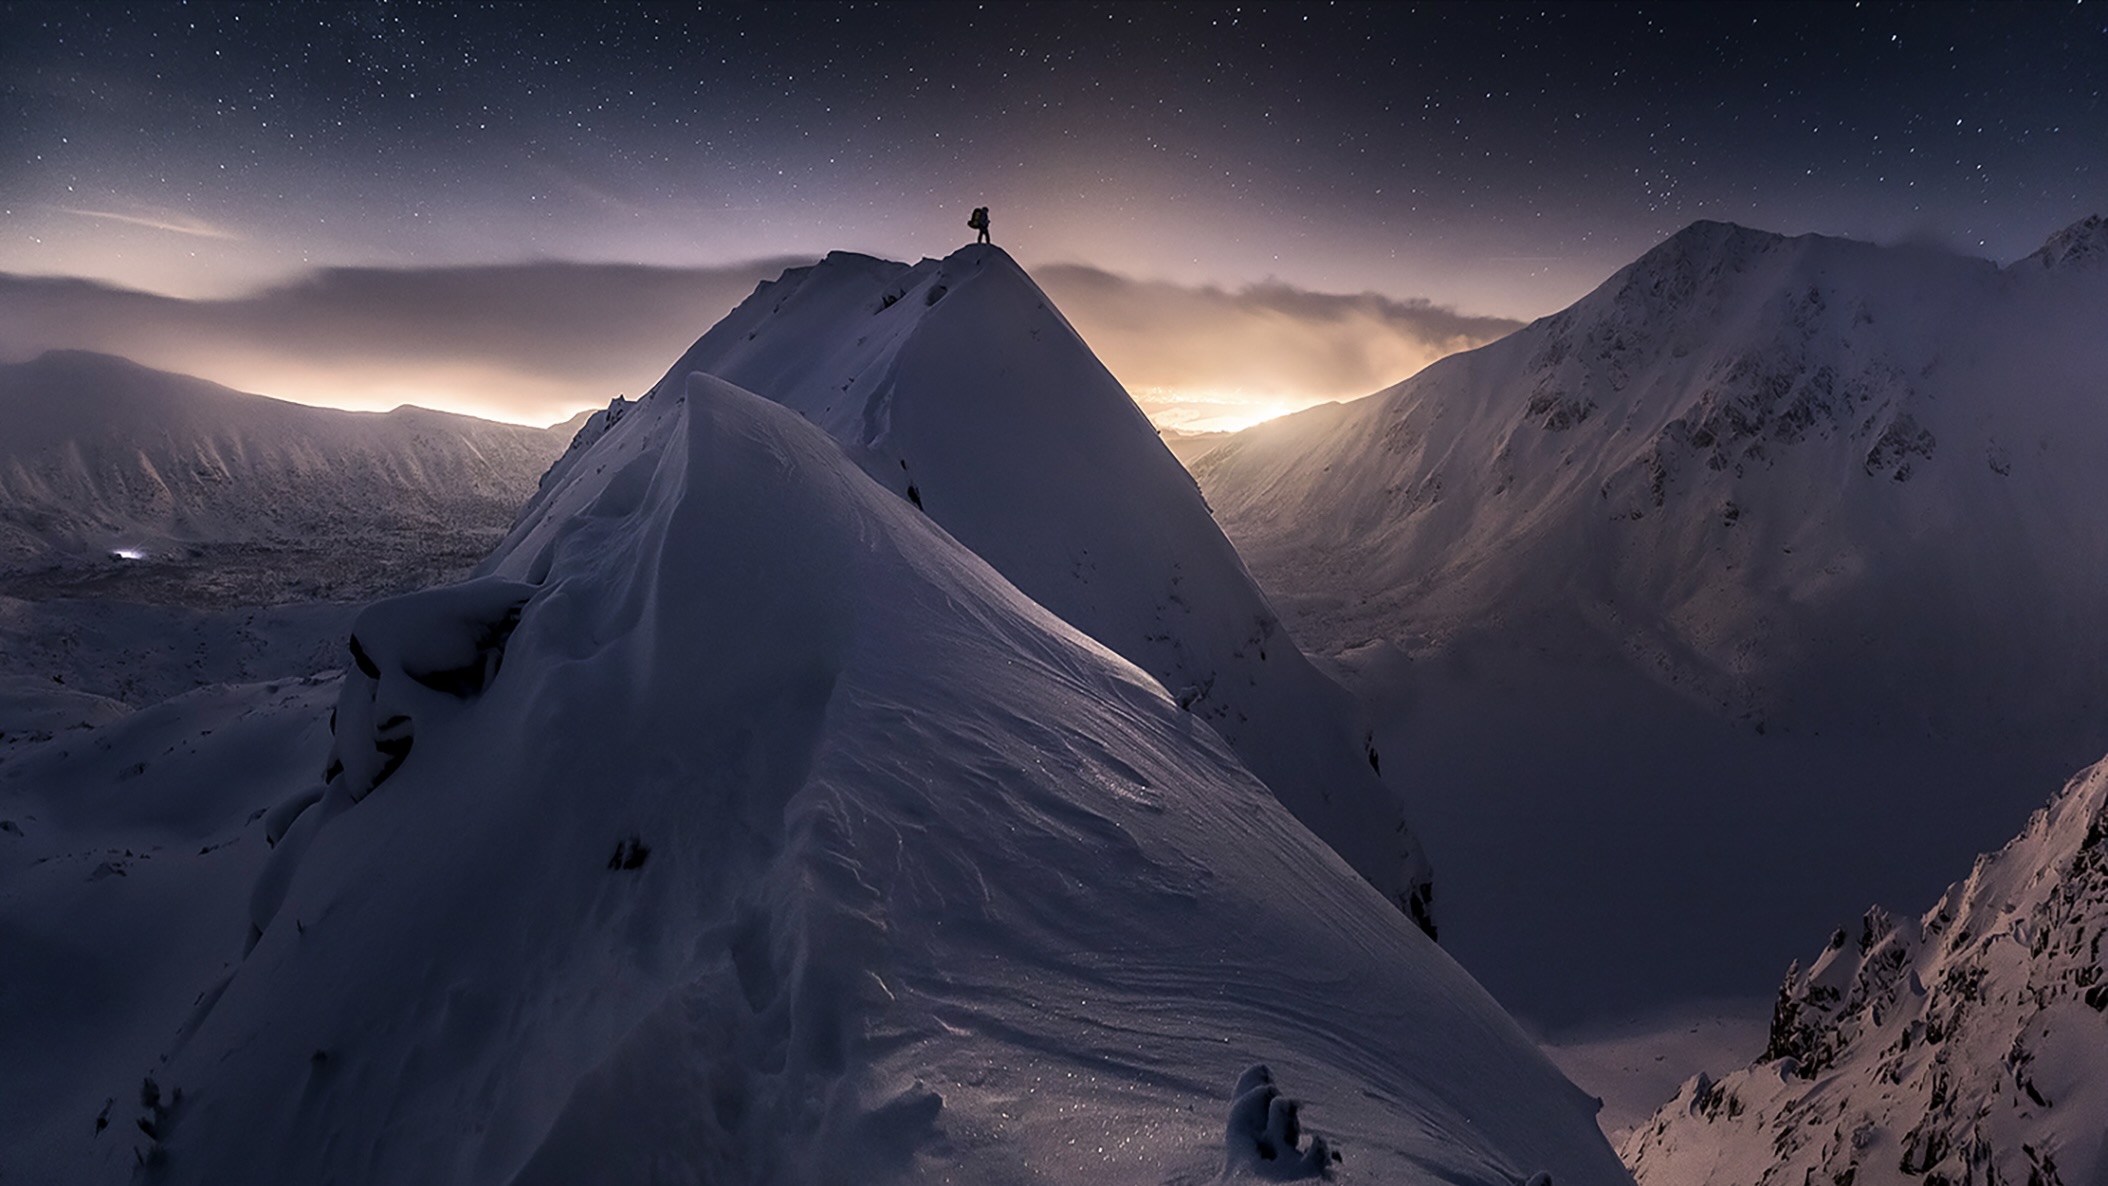 Meet the 500px Global Photography Awards Landscape Category Winner